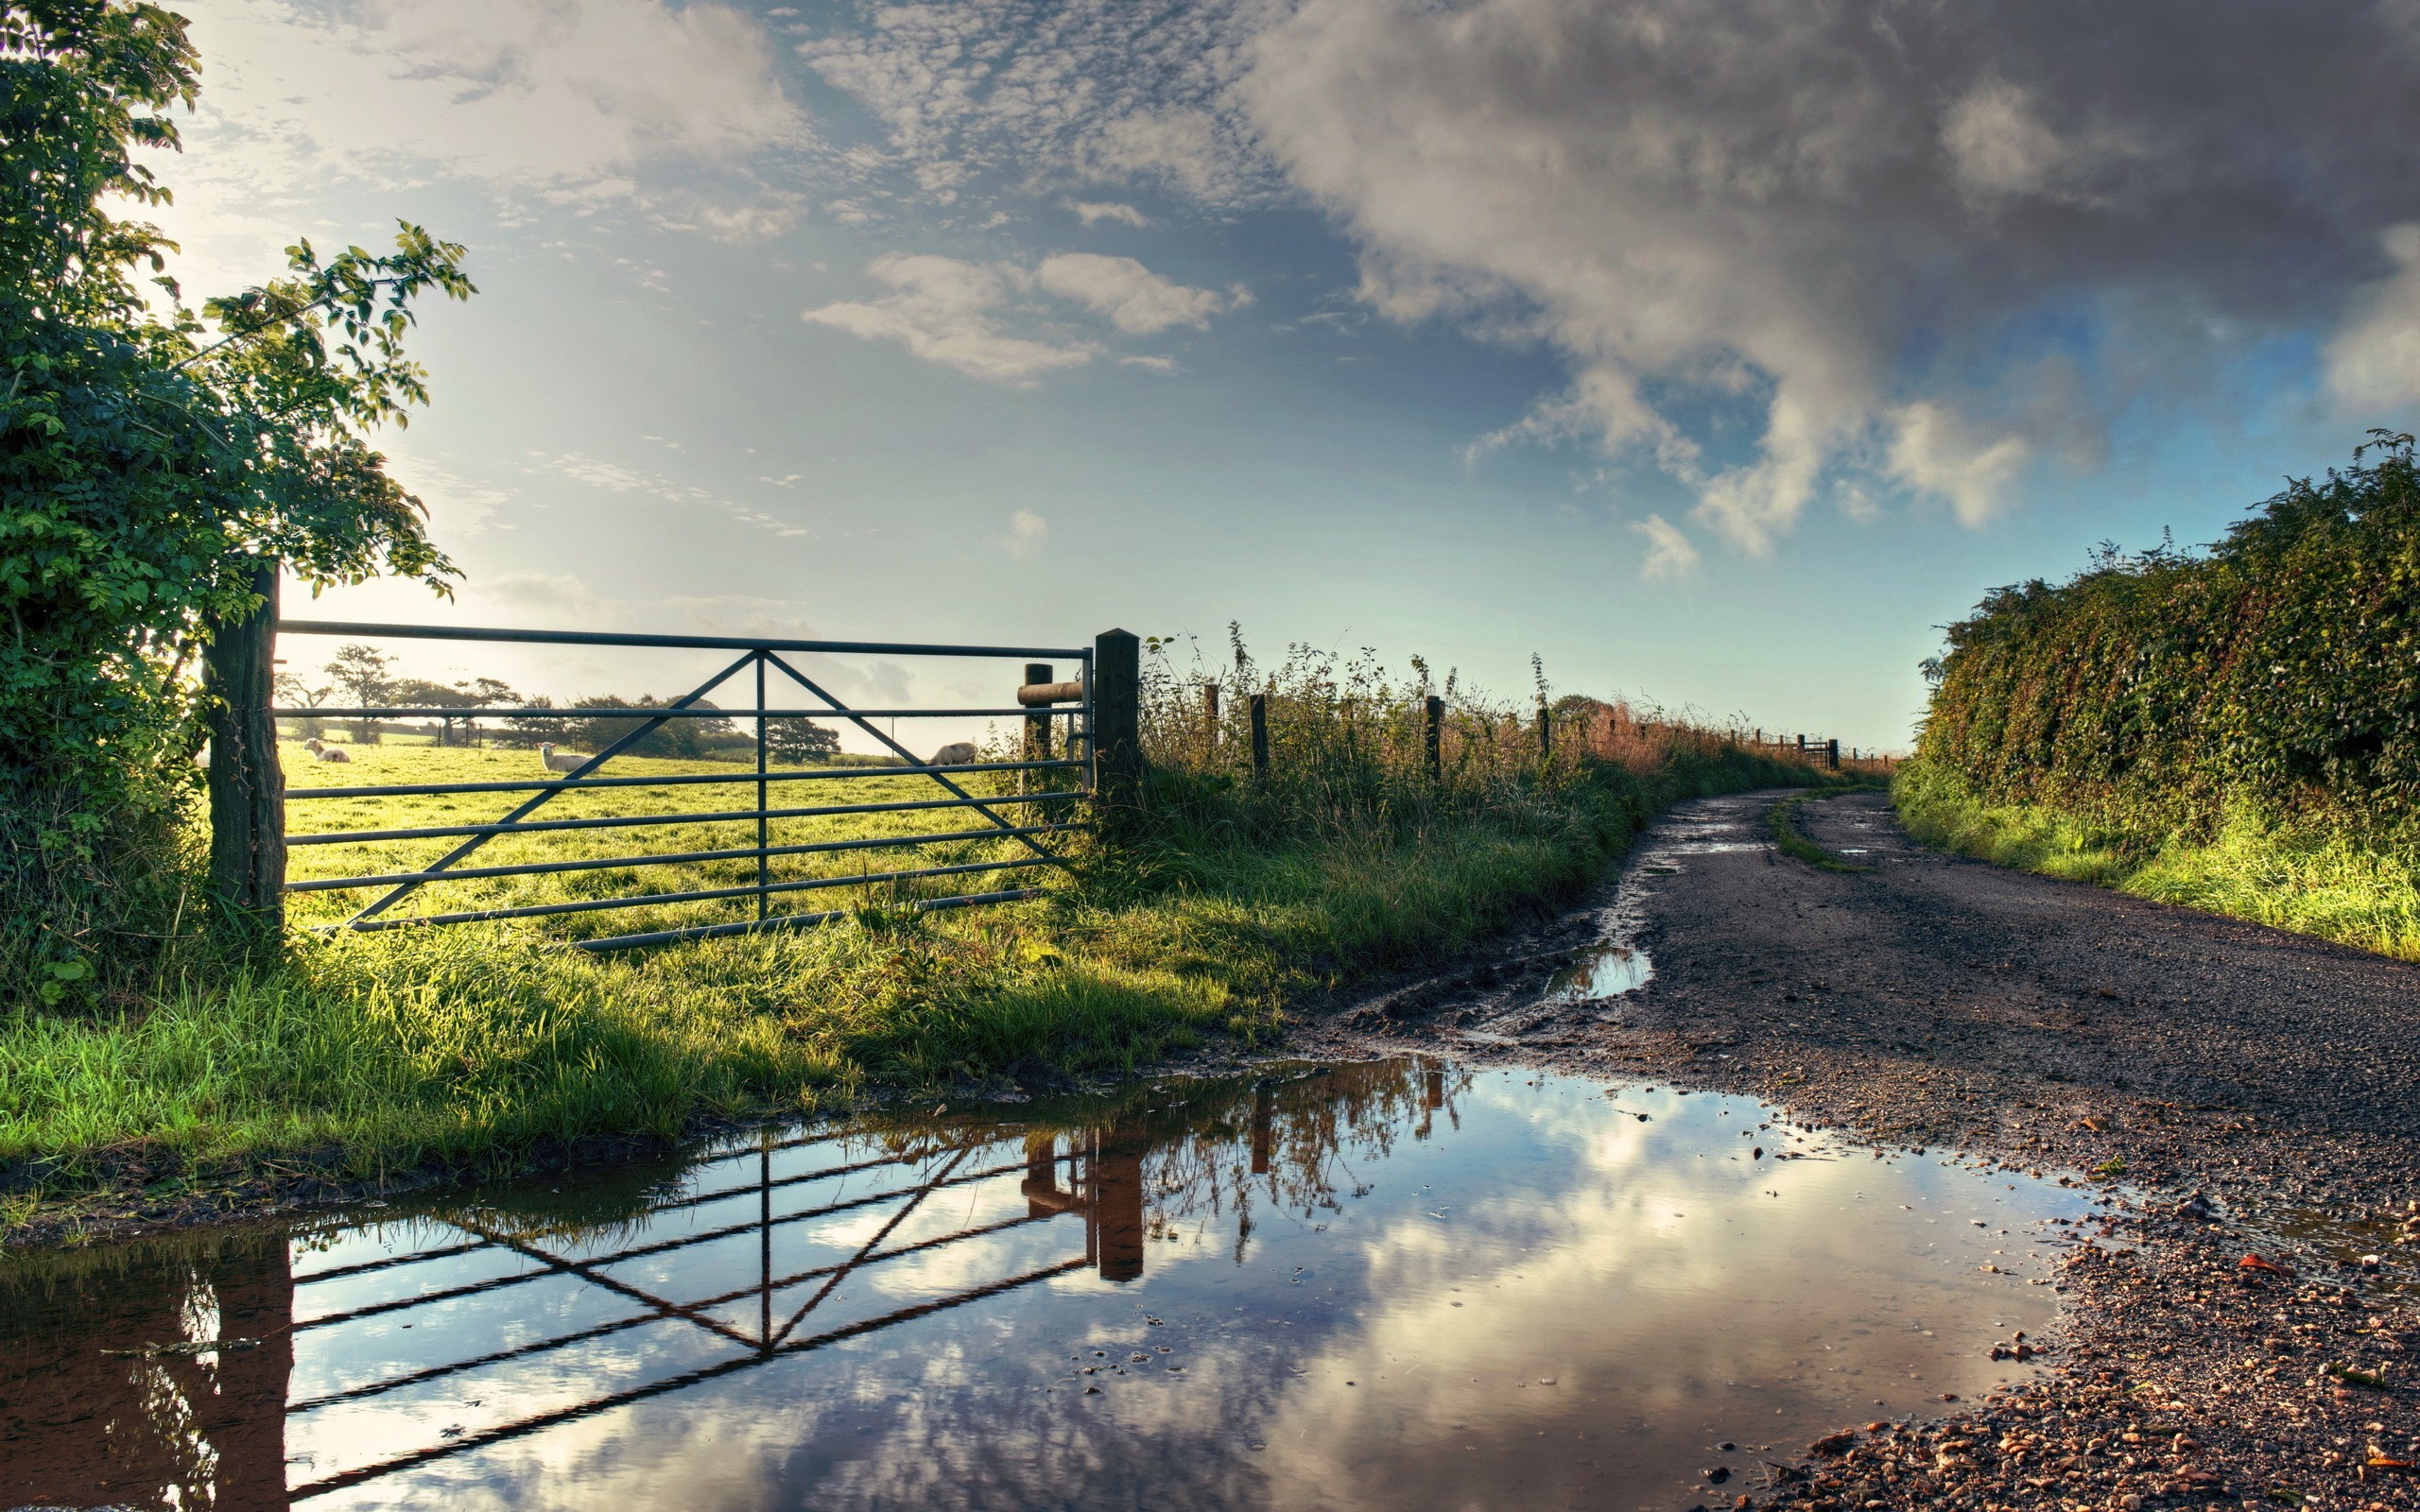 General 2560x1600 nature reflection road fence water clouds puddle sheep sunlight